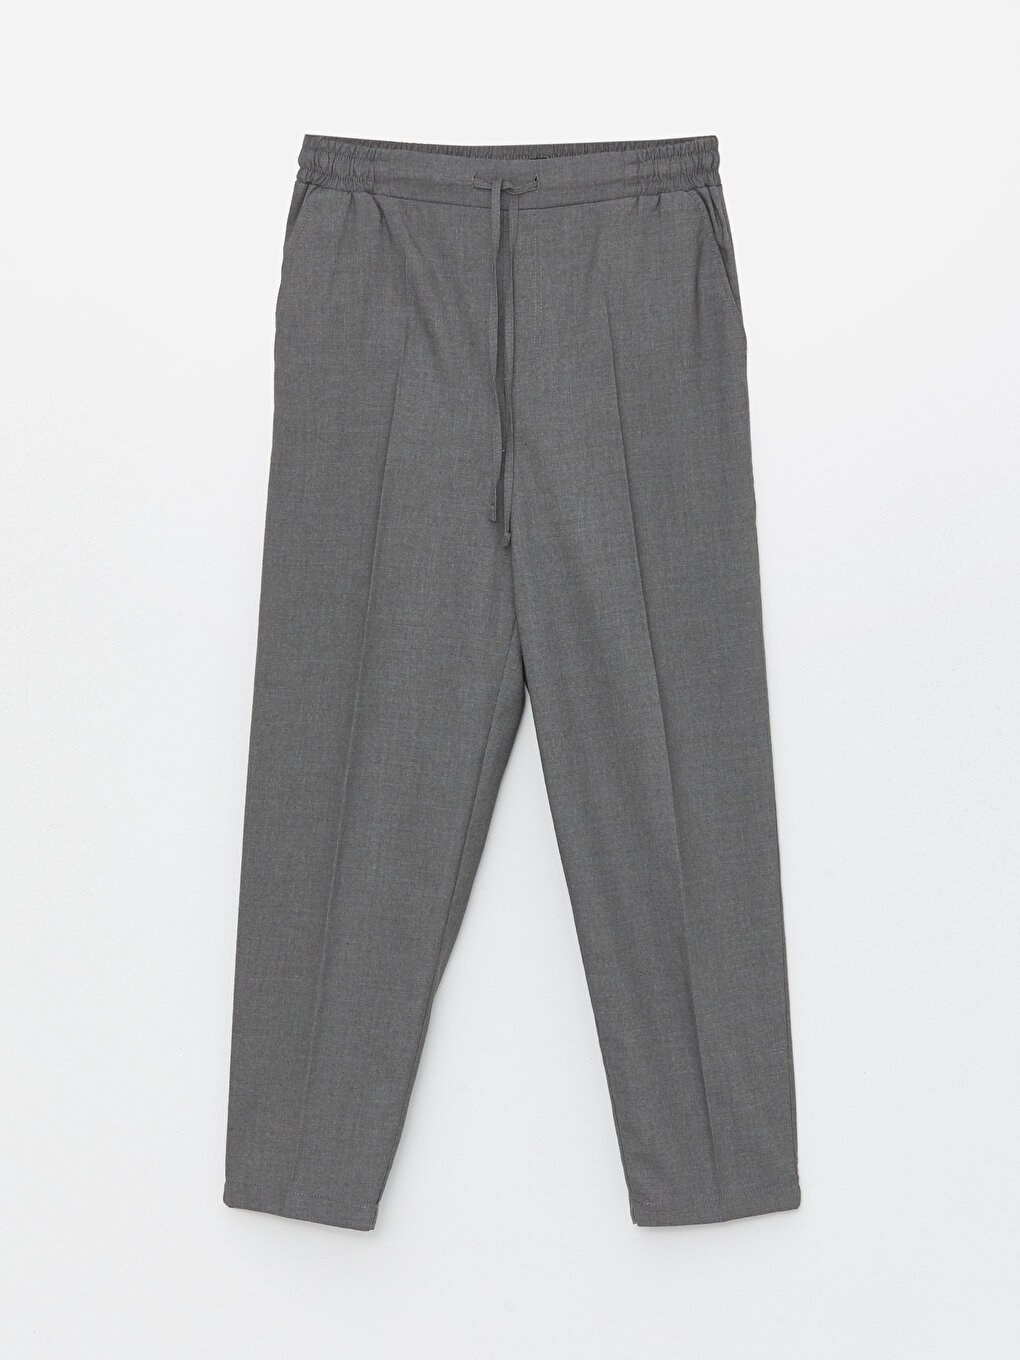 Standards & Practices Plus Size Women's Grey Hollywood Waist Crop Carrot  Pants